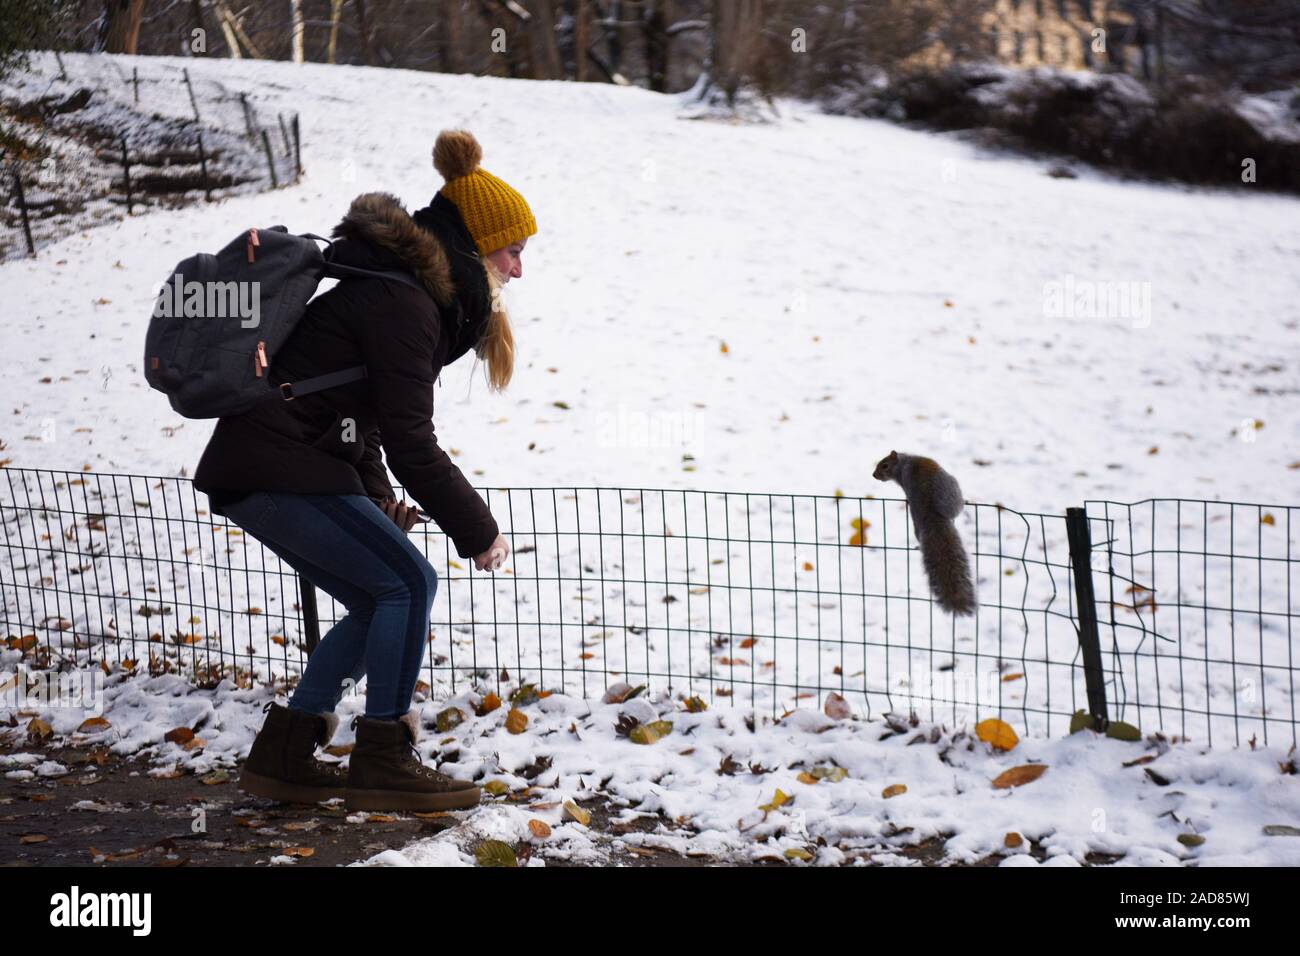 New York, USA. 3rd Dec, 2019. A visitor interacts with a squirrel after a snowfall in Central Park in New York, the United States, on Dec. 3, 2019. The first snowfall of the season hit New York City on Monday. Credit: Han Fang/Xinhua/Alamy Live News Stock Photo